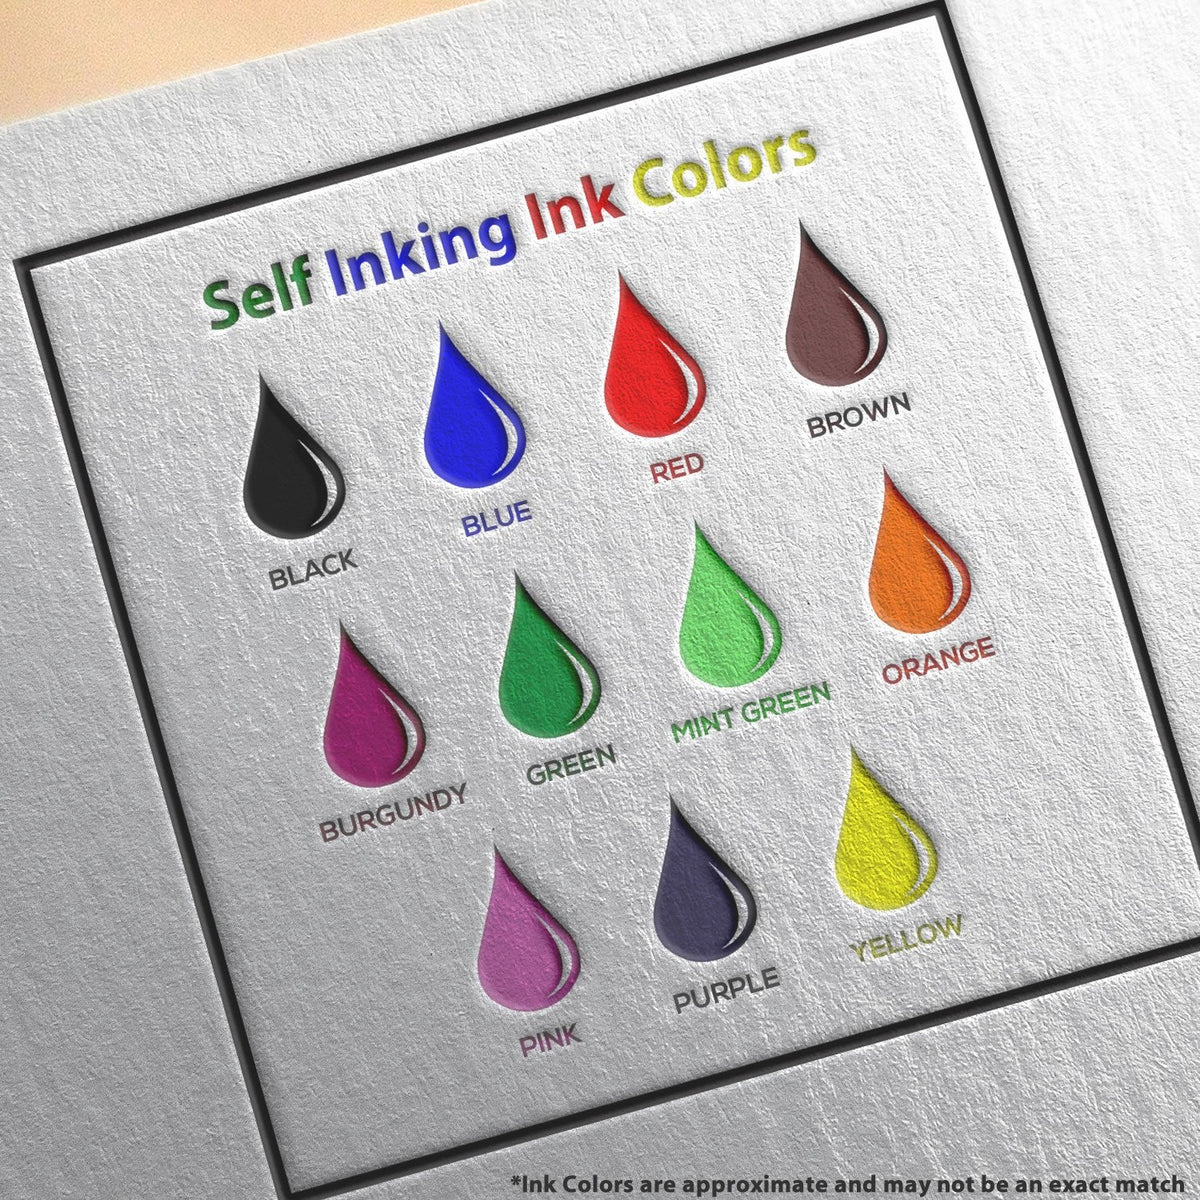 Self-Inking Round Paid with Line Stamp Ink Color Options